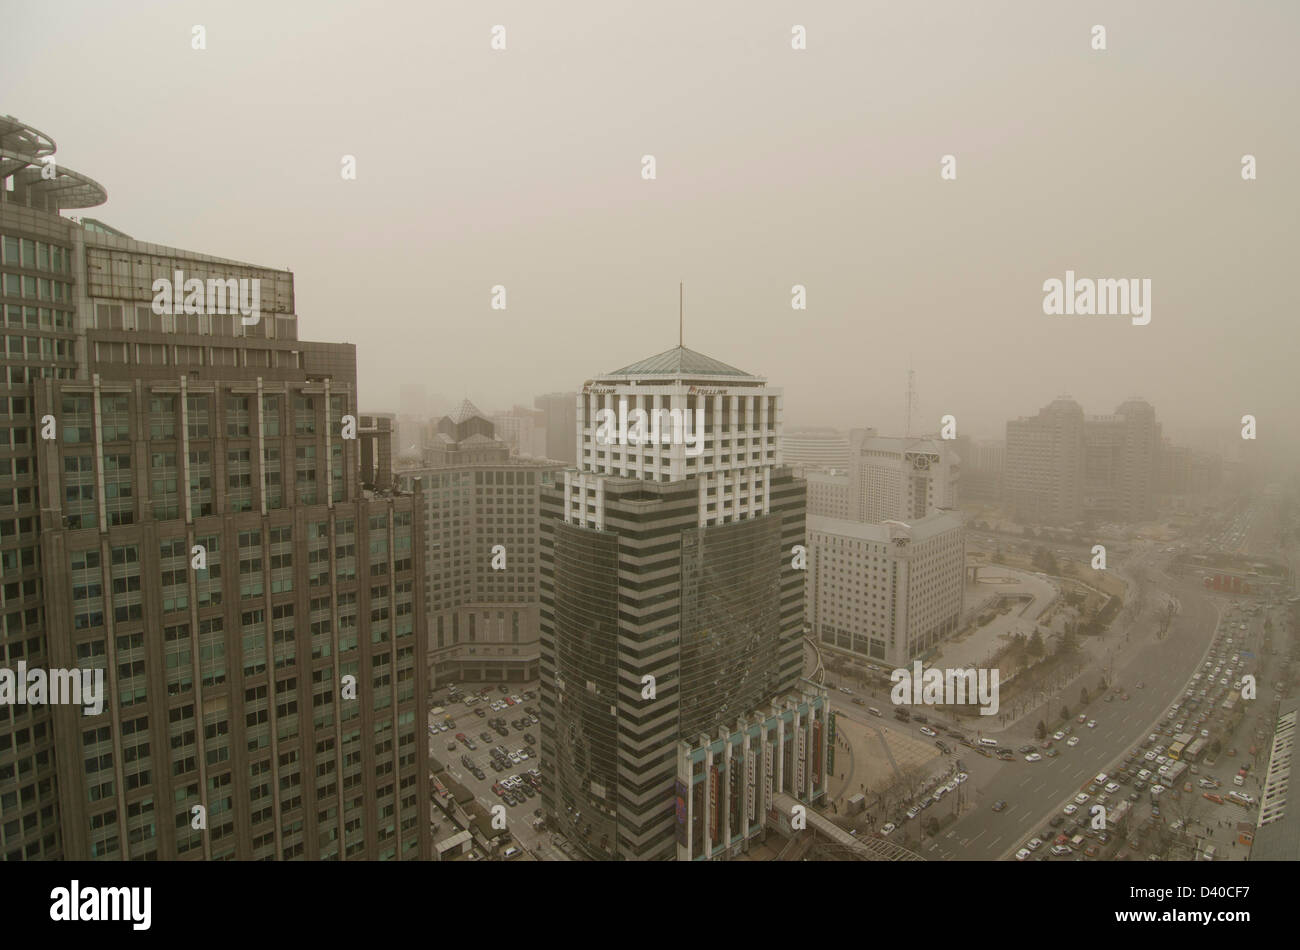 Aerial view across office and residential buildings of the skyline of the Chinese capital city shrouded in smog. Whenever the northerly winds stop, the polluting coal power stations, crop burning and traffic fumes combine, resulting in hazardous air pollution with levels often in excess of 500 on the Air Quality Index, as seen here in the Chaoyang district of Bejiing, China, PRC. © Time-Snaps Stock Photo